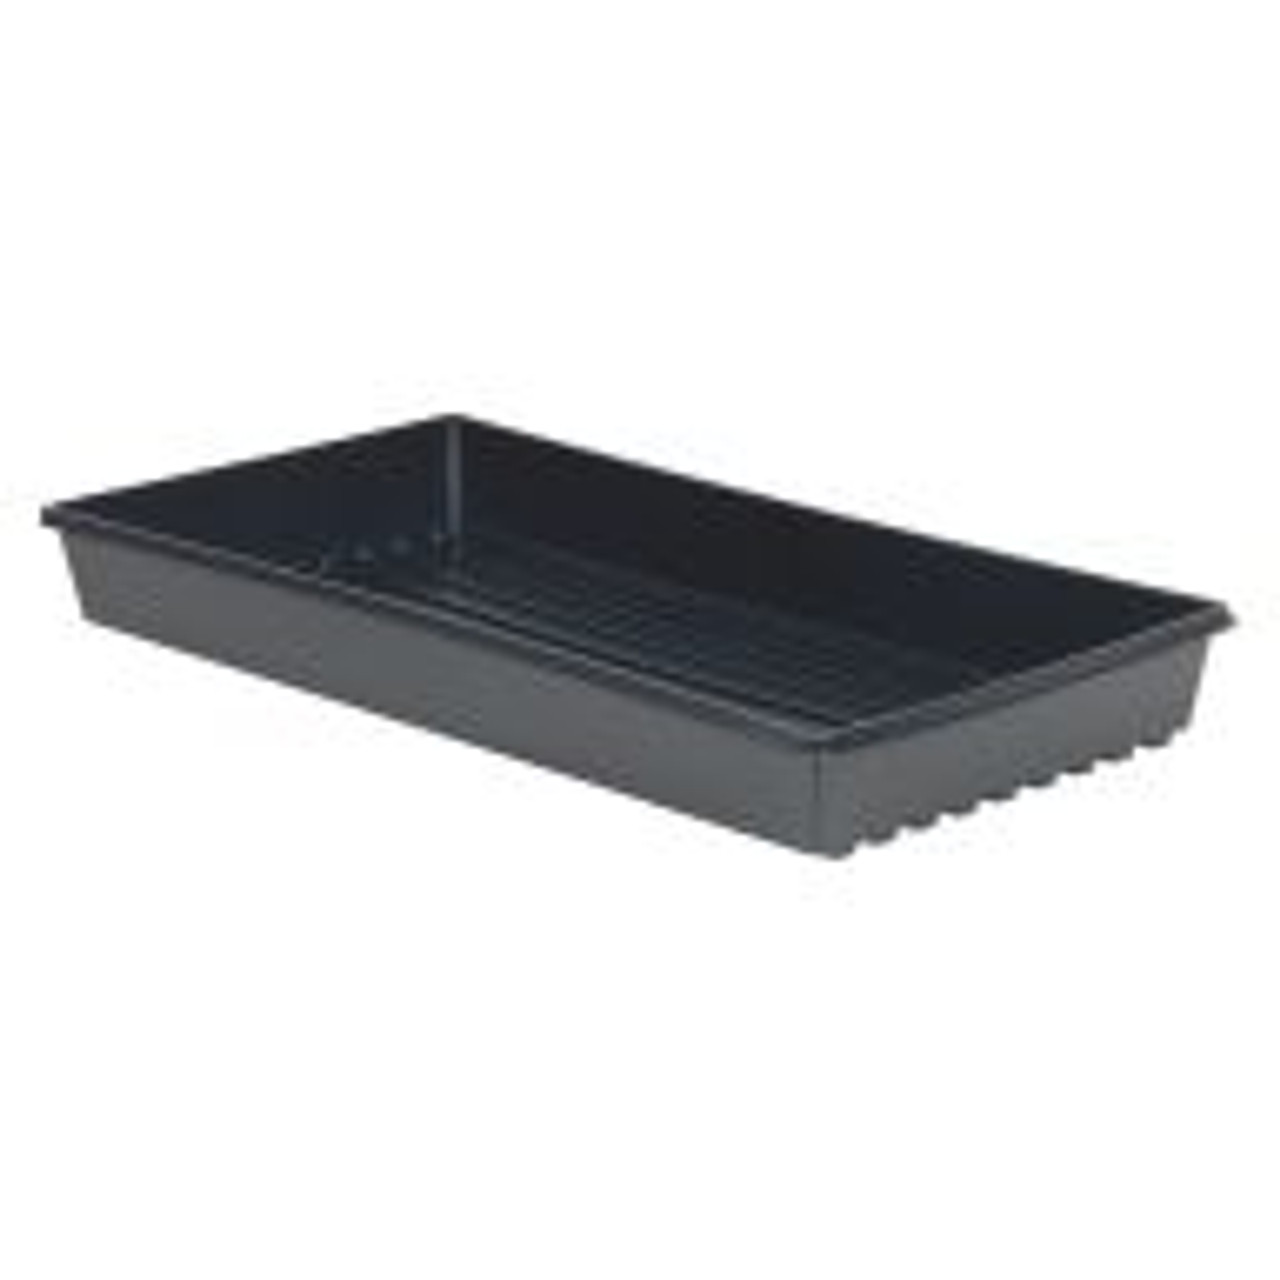 High-sided, full depth Black Standard Flats provide maximum strength for filling and stacking. Units measure 21" x 10 3/4" x 2 3/8".